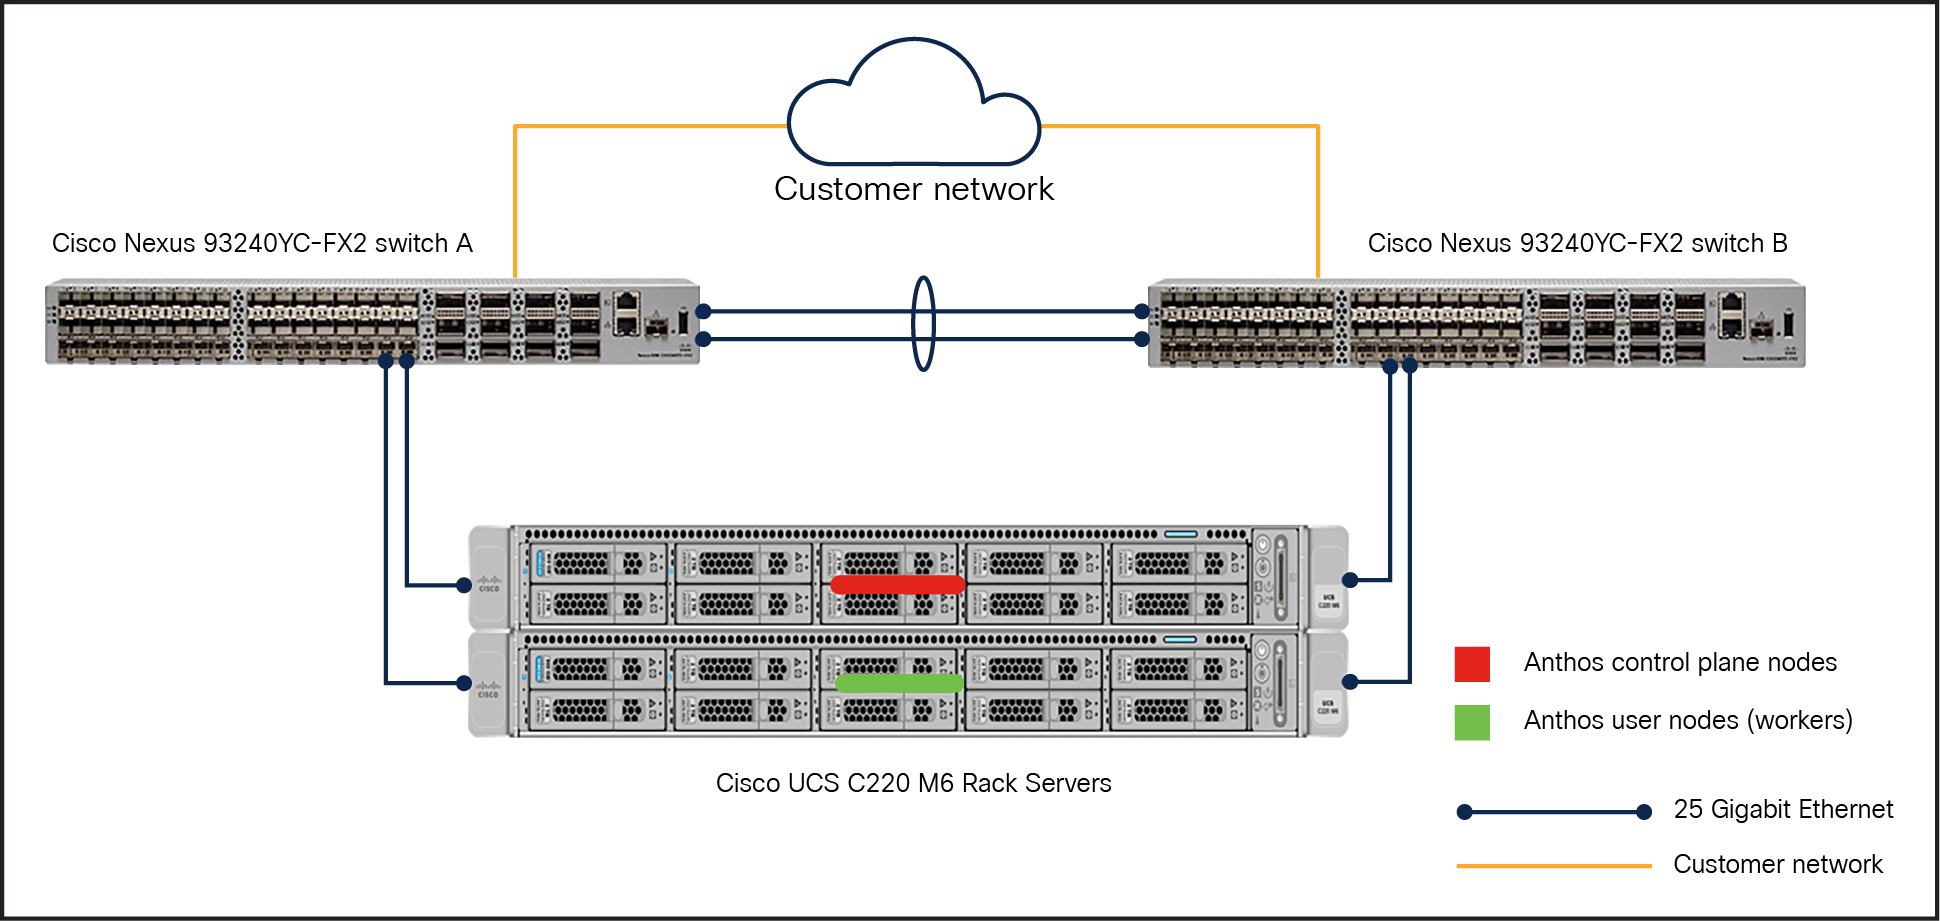 Reference architecture for Anthos bare metal in non-HA mode on Cisco UCS C240 M6 Rack Servers